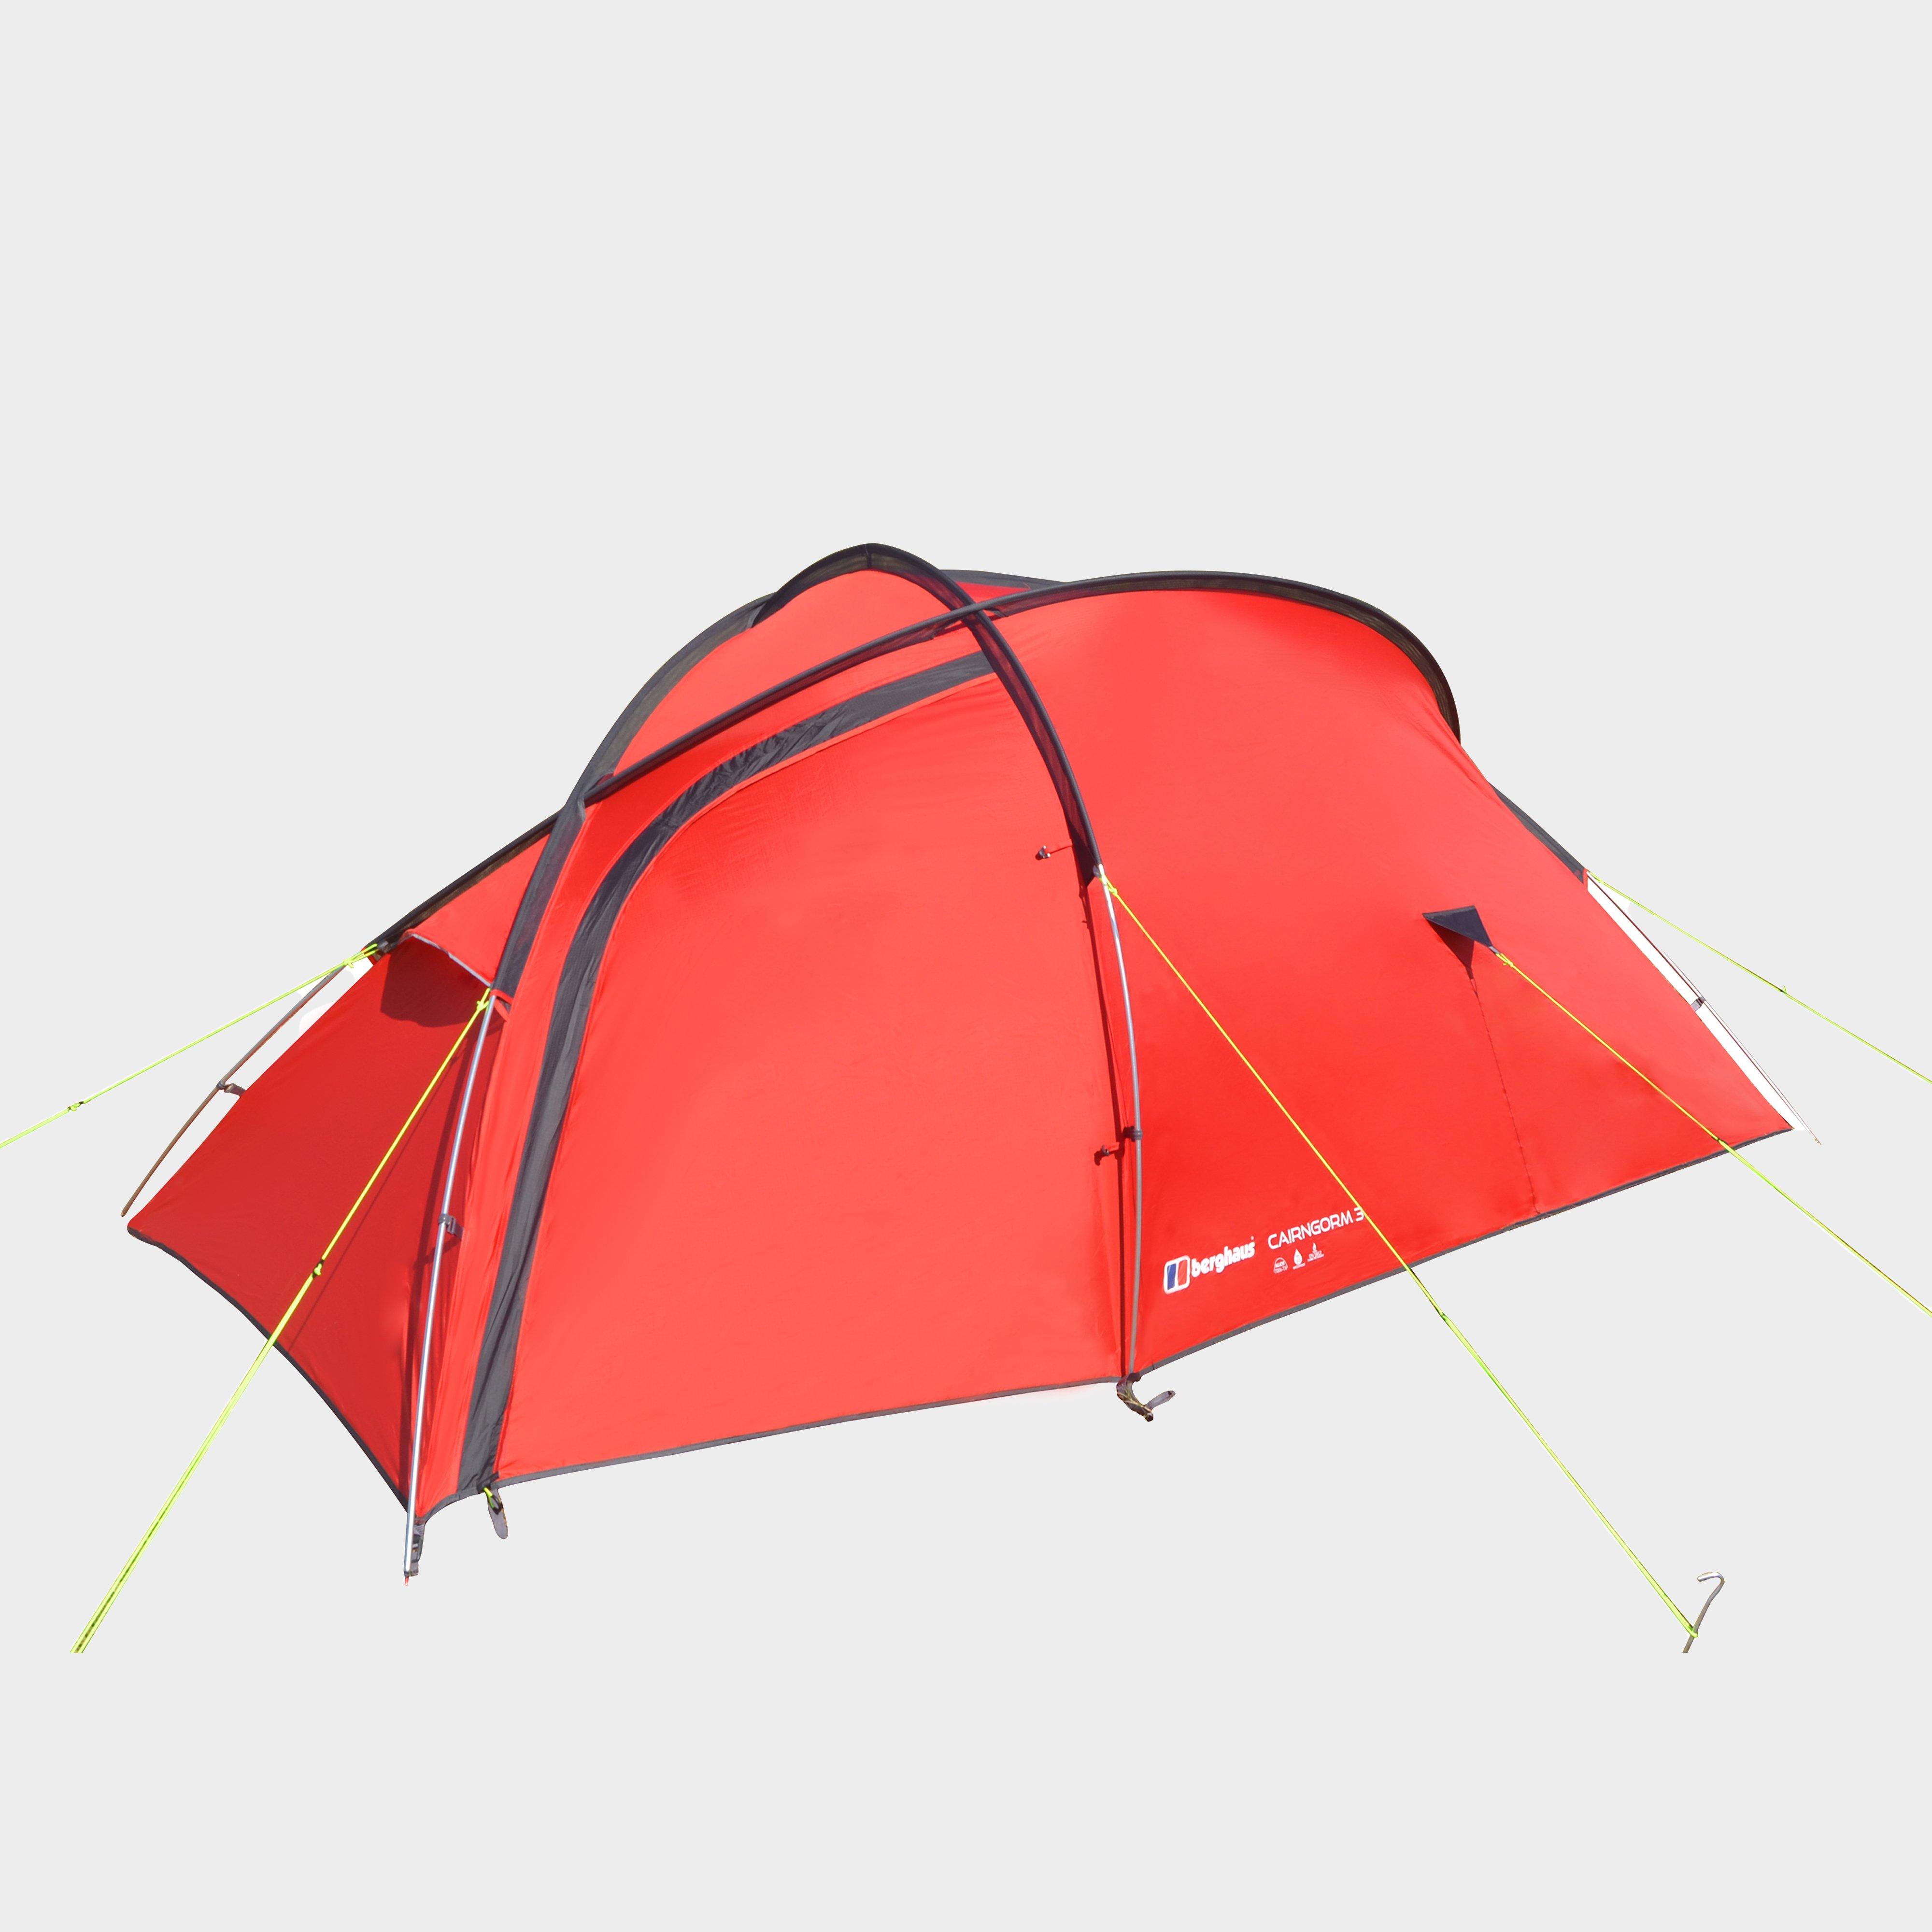 Berghaus Cairngorm 3 Tent - Red/red  Red/red